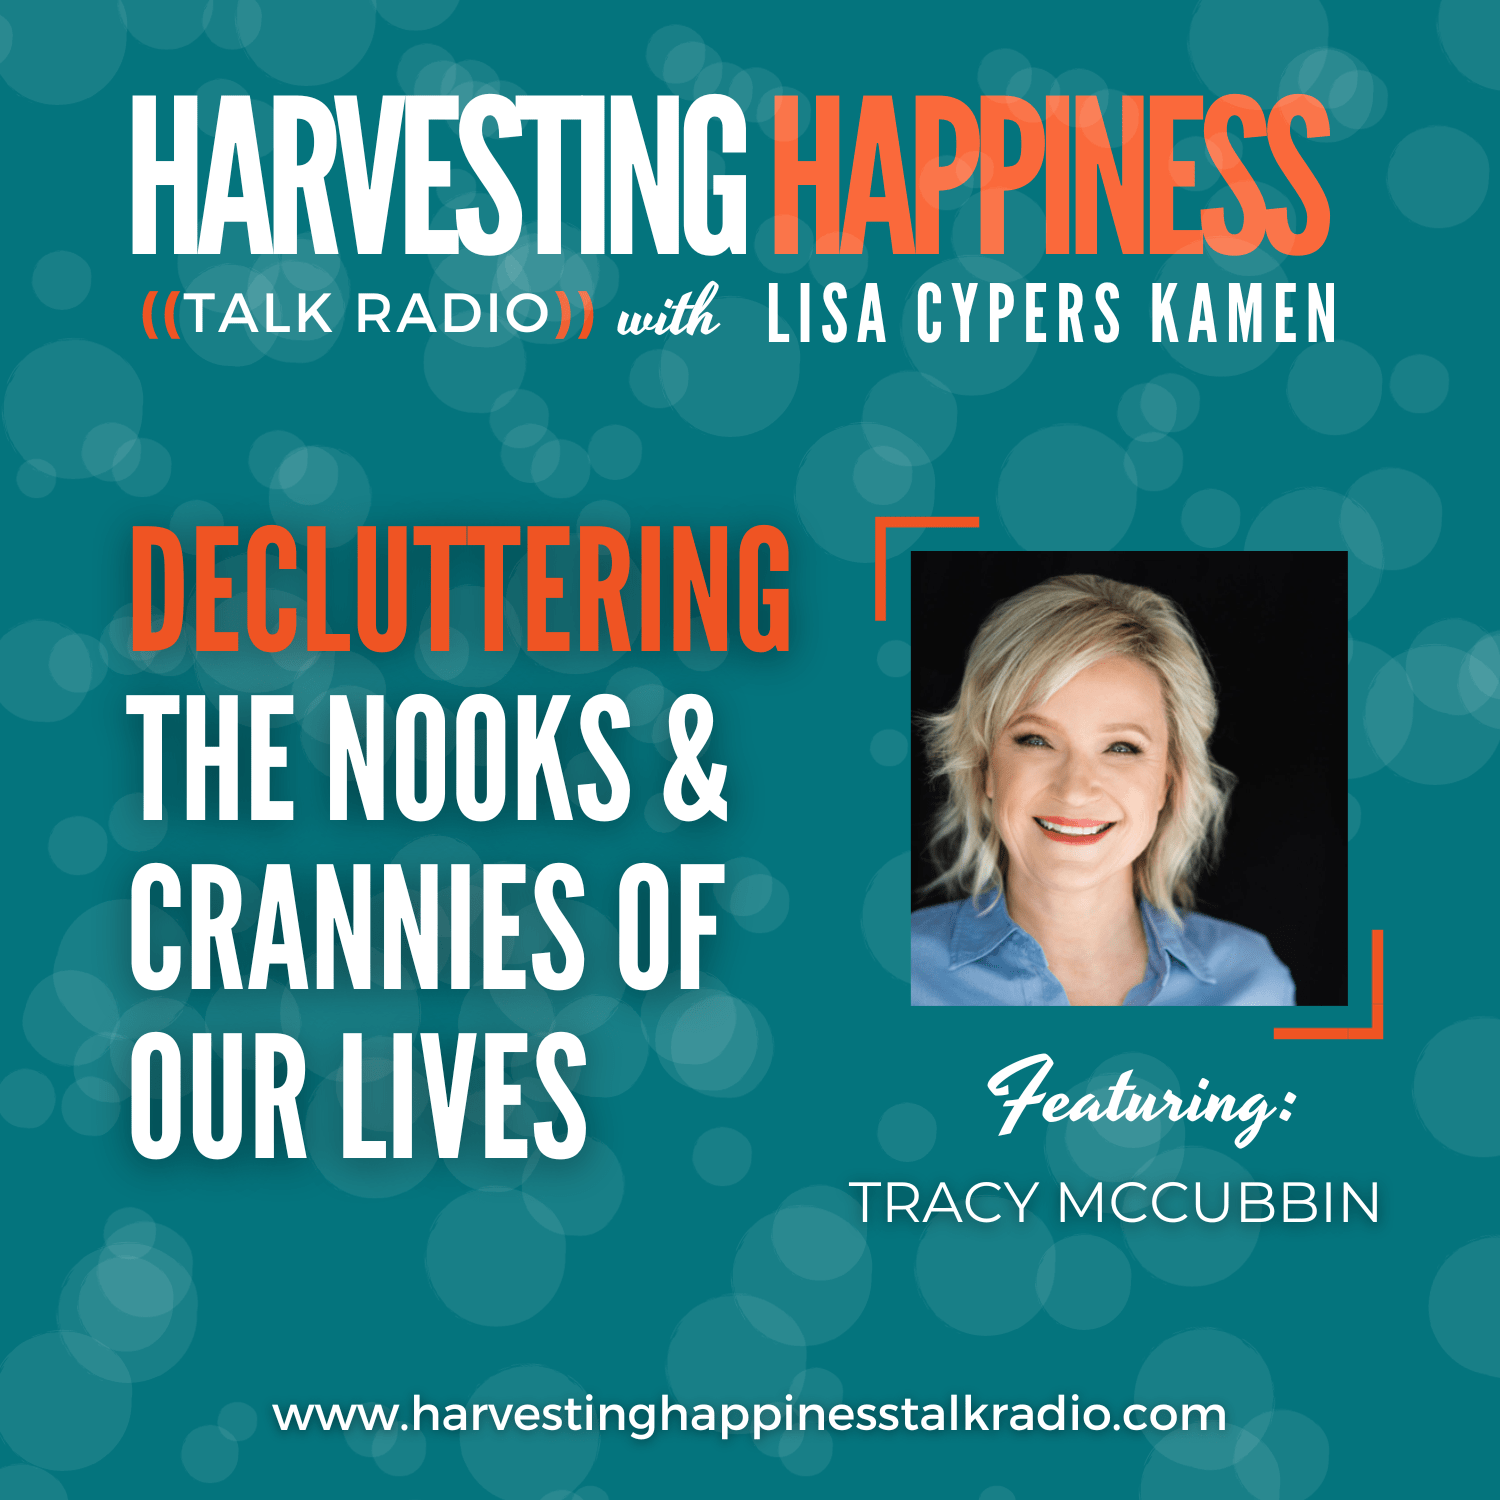 Decluttering The Nooks and Crannies of Our Lives with Tracy McCubbin